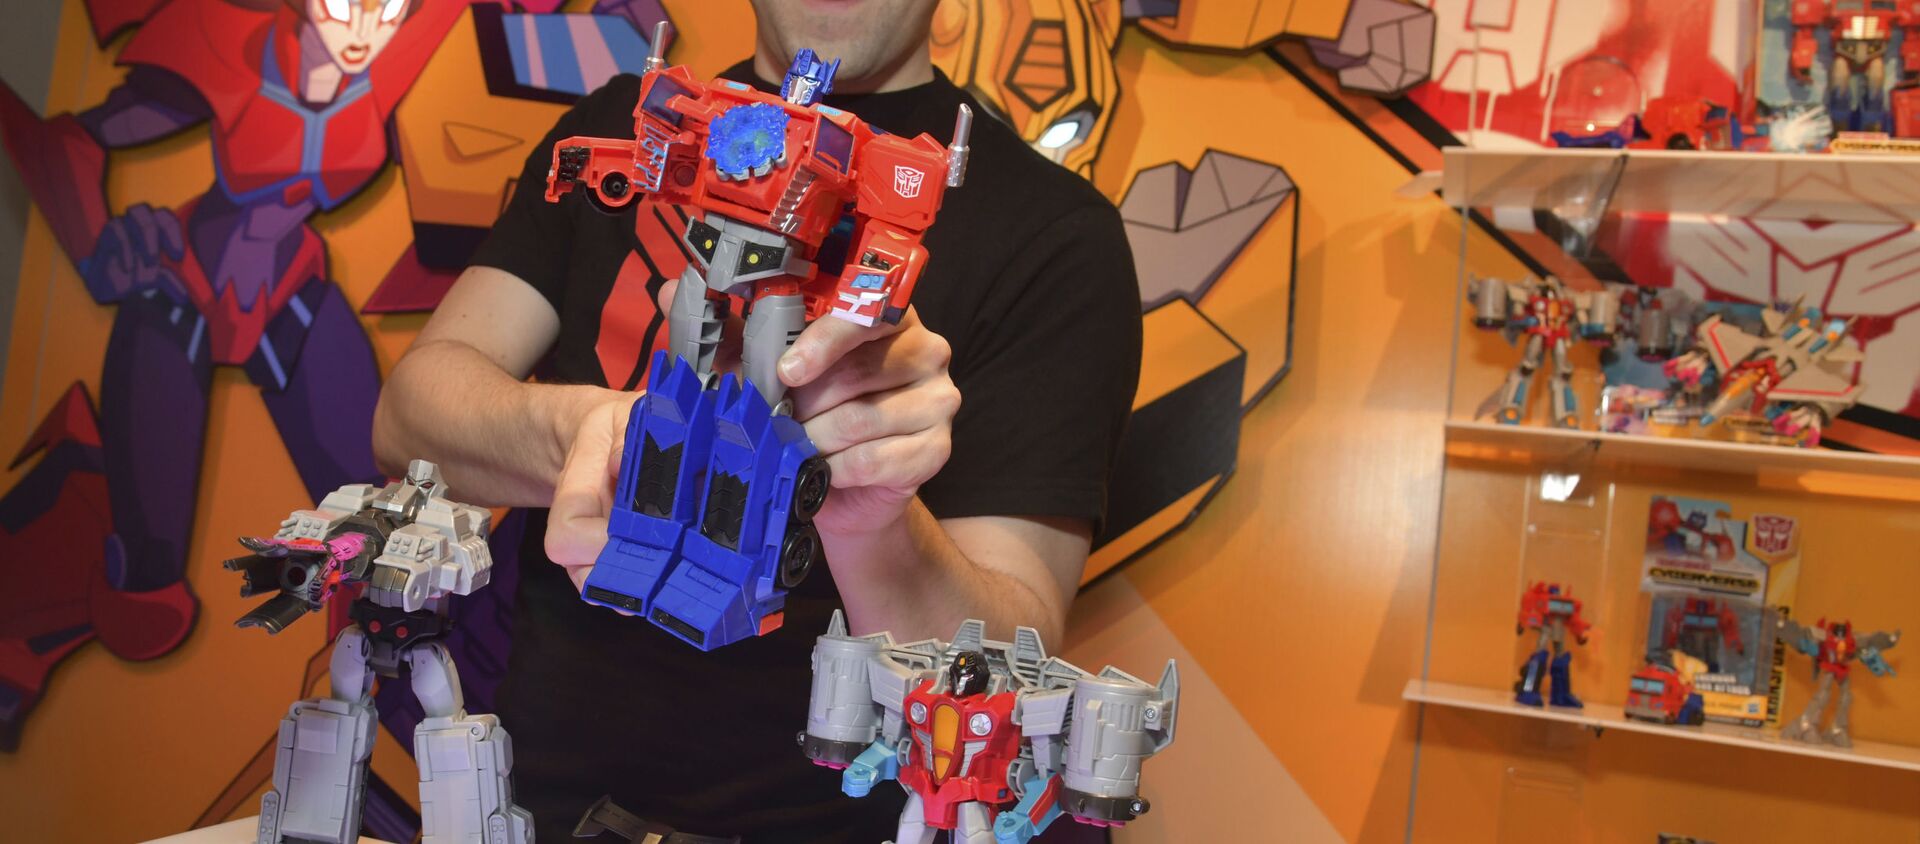 A demonstrator at the Hasbro, Inc. showroom has some fun with the new TRANSFORMERS CYBERVERSE ULTIMATE CLASS OPTIMUS PRIME, converting it from vehicle to robot mode to activate his signature Matrix Mega Shot Action Attack move at American International Toy Fair on Saturday, Feb. 17, 2018 in New York. - Sputnik International, 1920, 09.04.2021